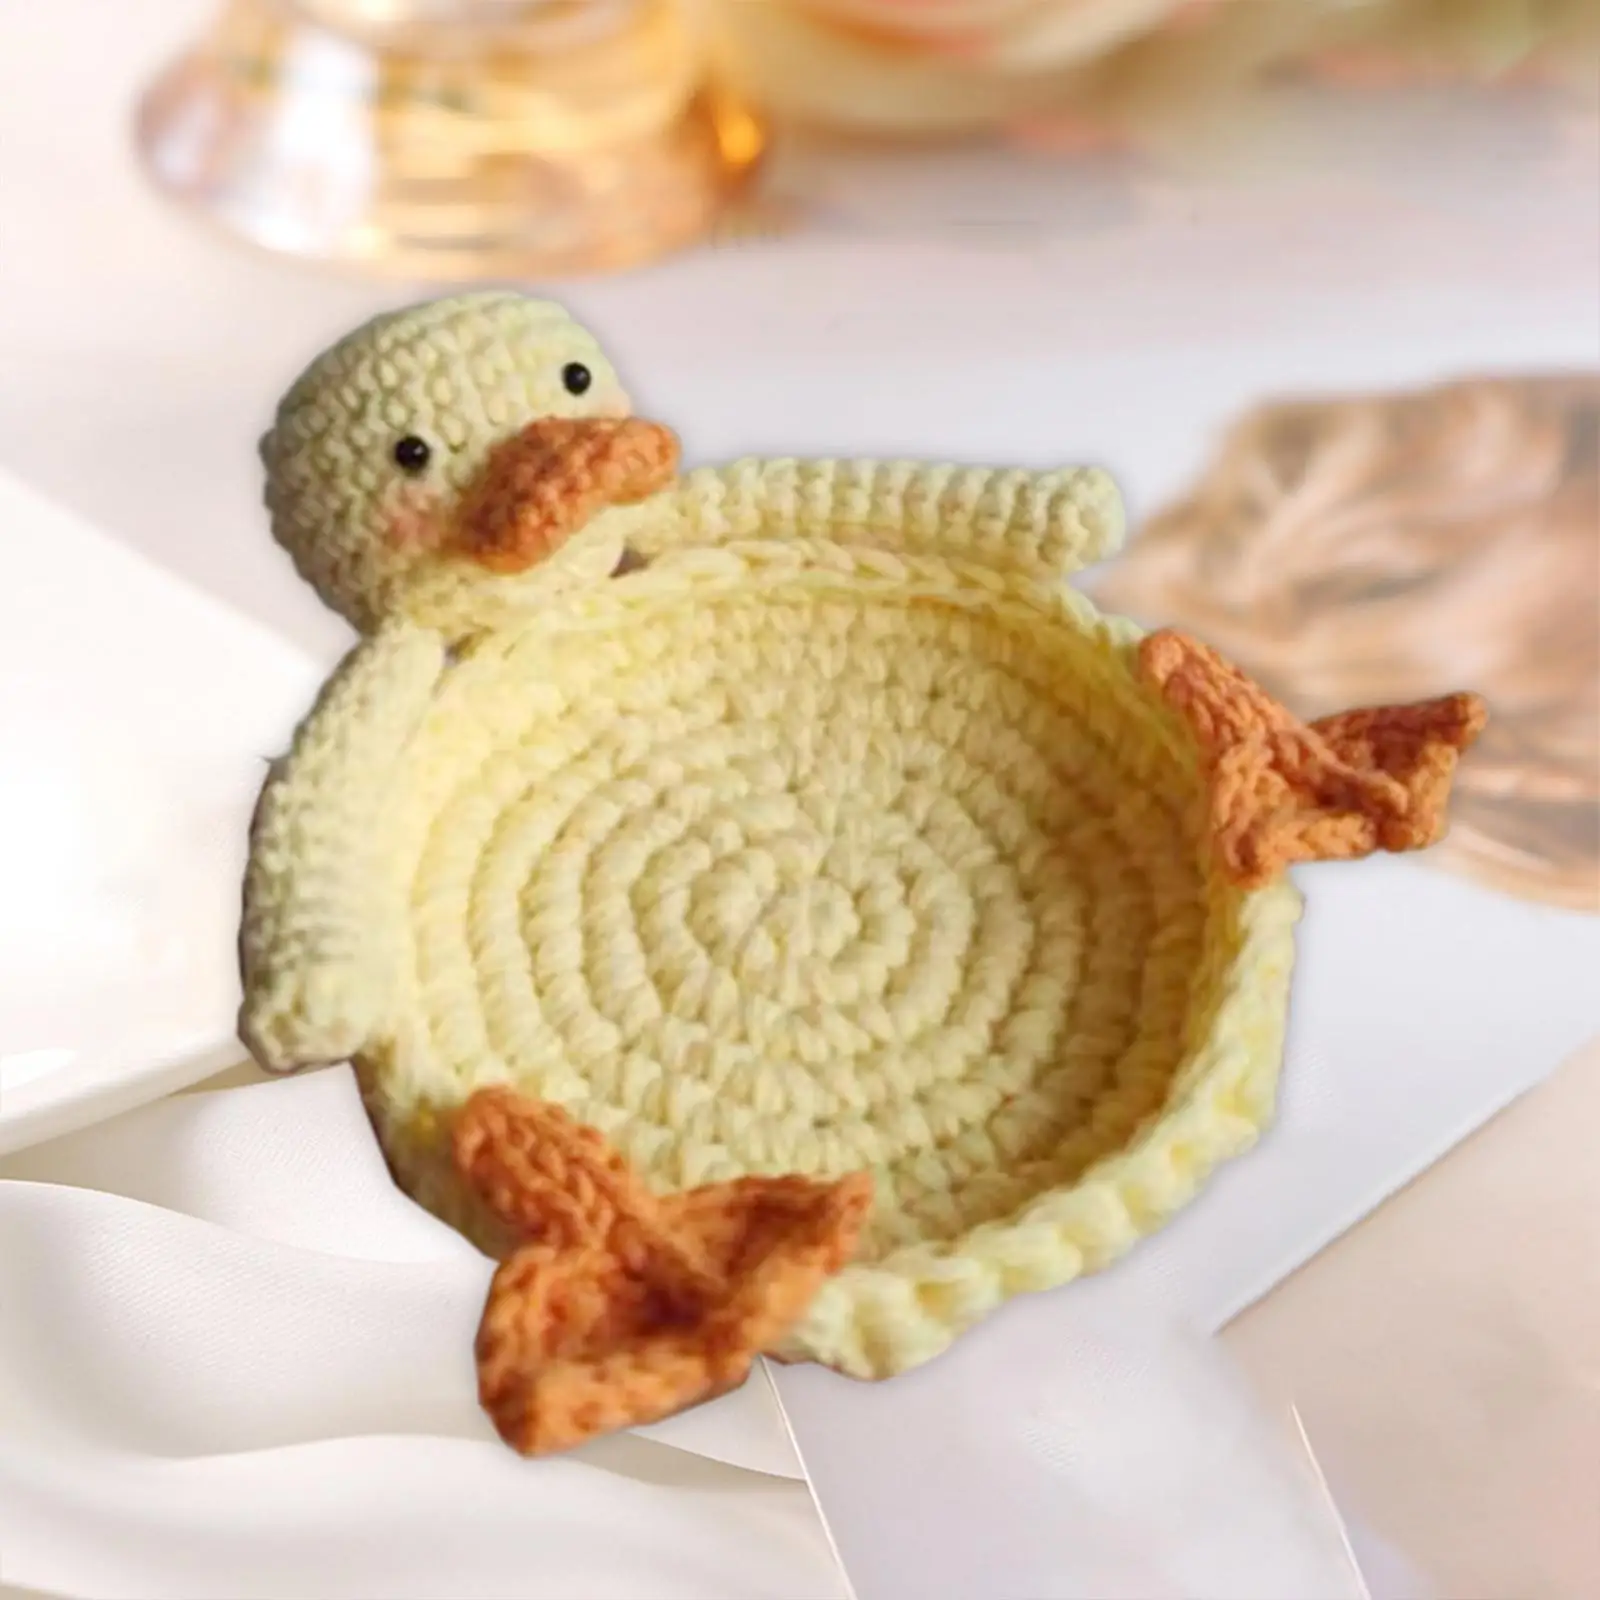 Drinks Coaster Place Mats Duck Shaped Coaster for Dining Table Kitchen Home